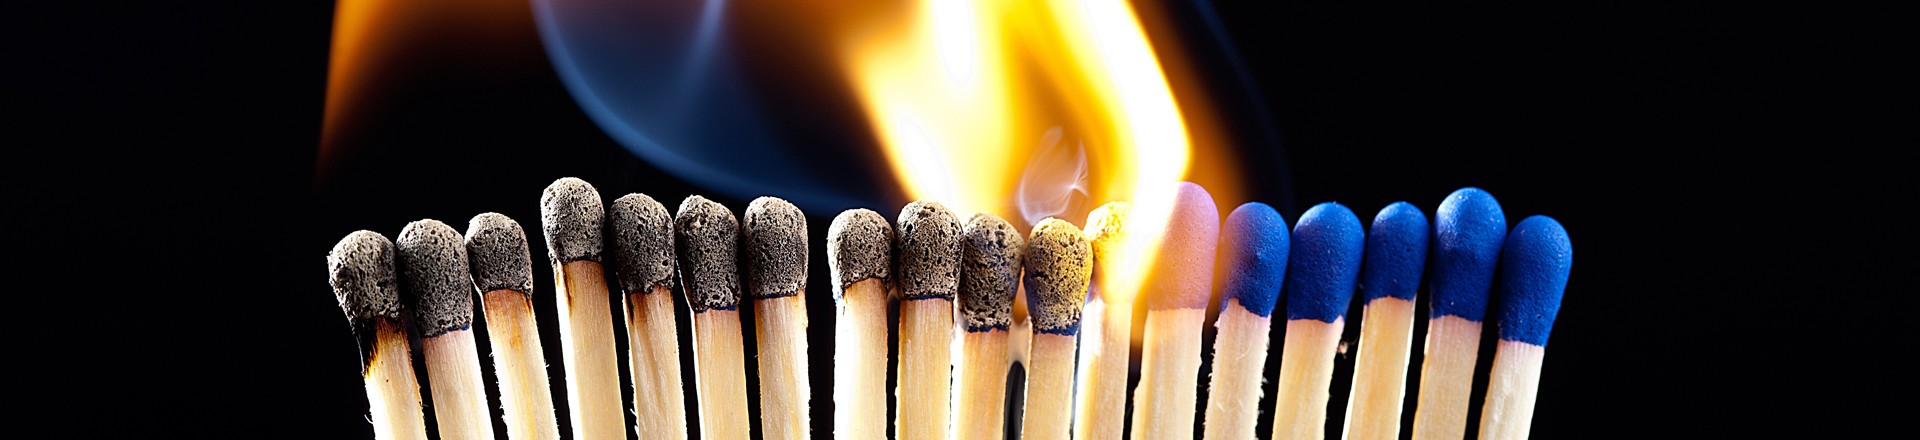 a row of lit match sticks represent chronic inflammation in the body